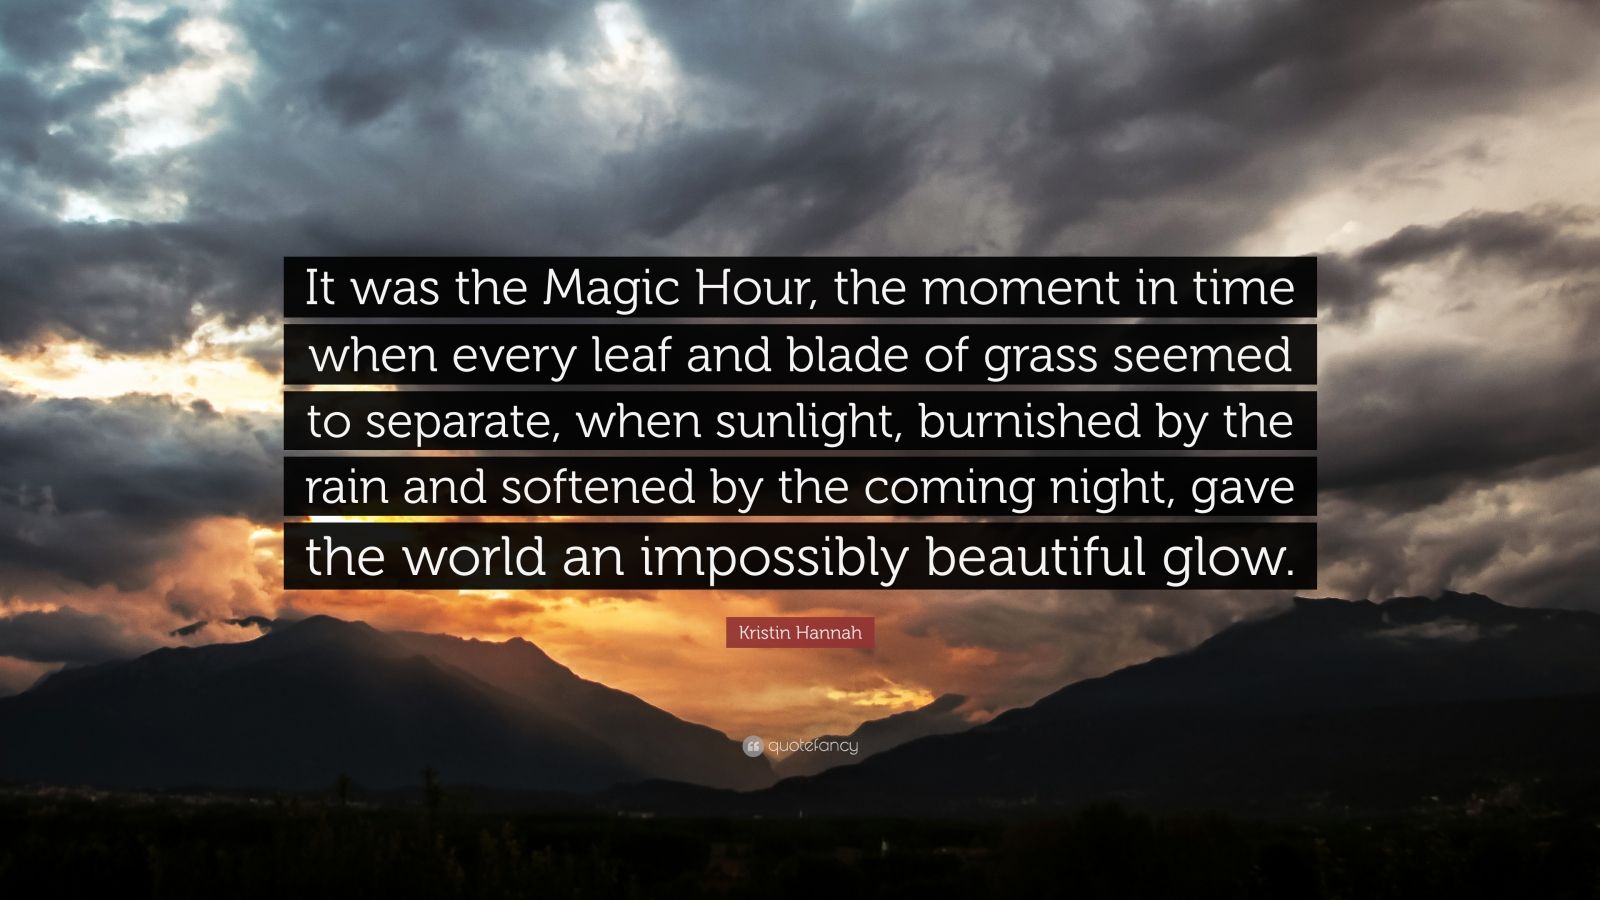 Kristin Hannah Quote It was the Magic Hour the moment 